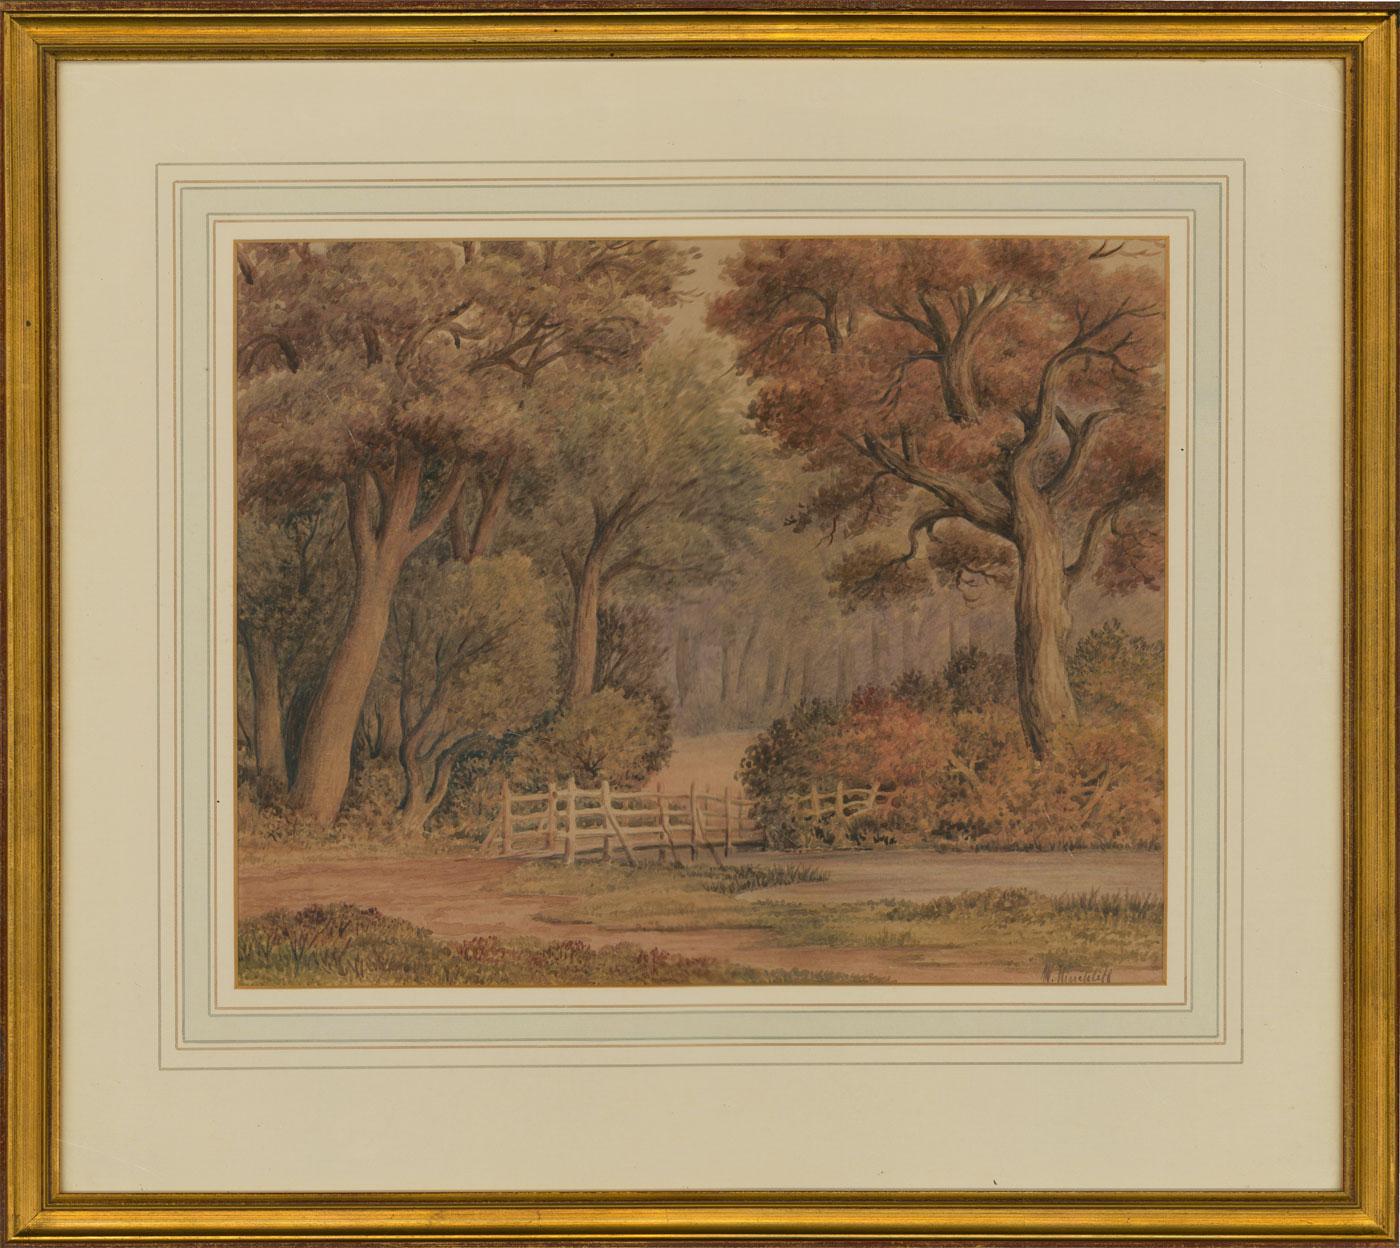 Unknown Landscape Art - W. Hinchcliff - Late 19th Century Watercolour, Forest Scene with a Pond